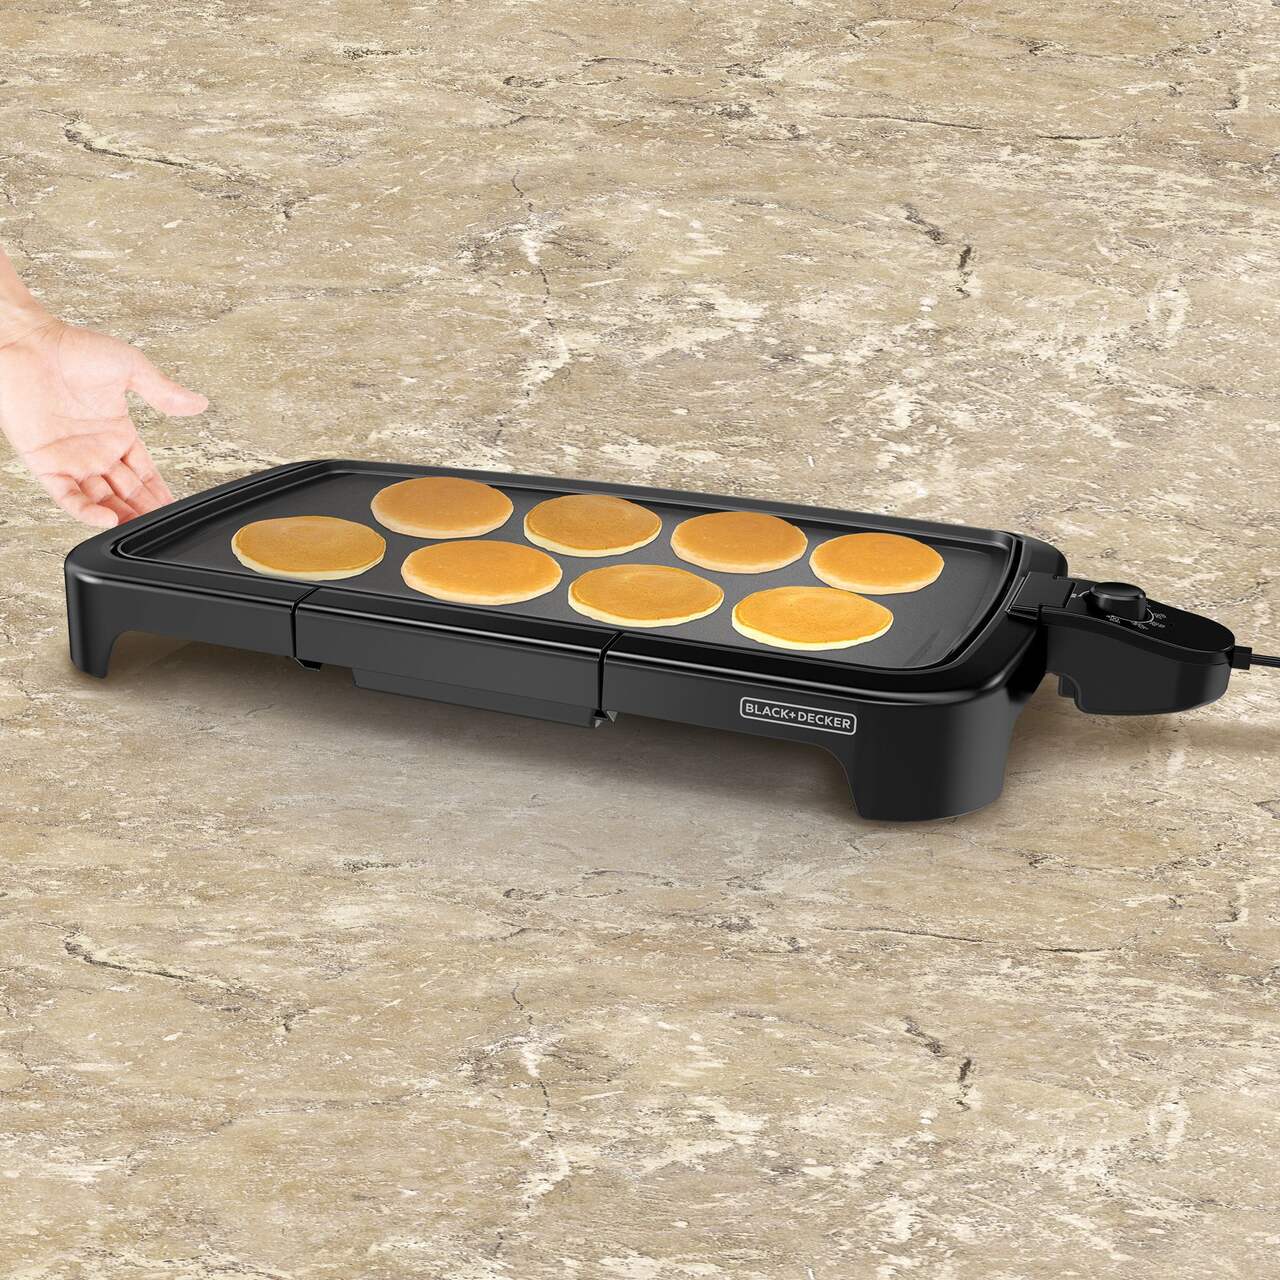 https://media-www.canadiantire.ca/product/living/kitchen/kitchen-appliances/0430144/black-decker-family-sized-electric-griddle-a77f1332-d97f-45c6-9852-0ec1411d8d72-jpgrendition.jpg?imdensity=1&imwidth=1244&impolicy=mZoom